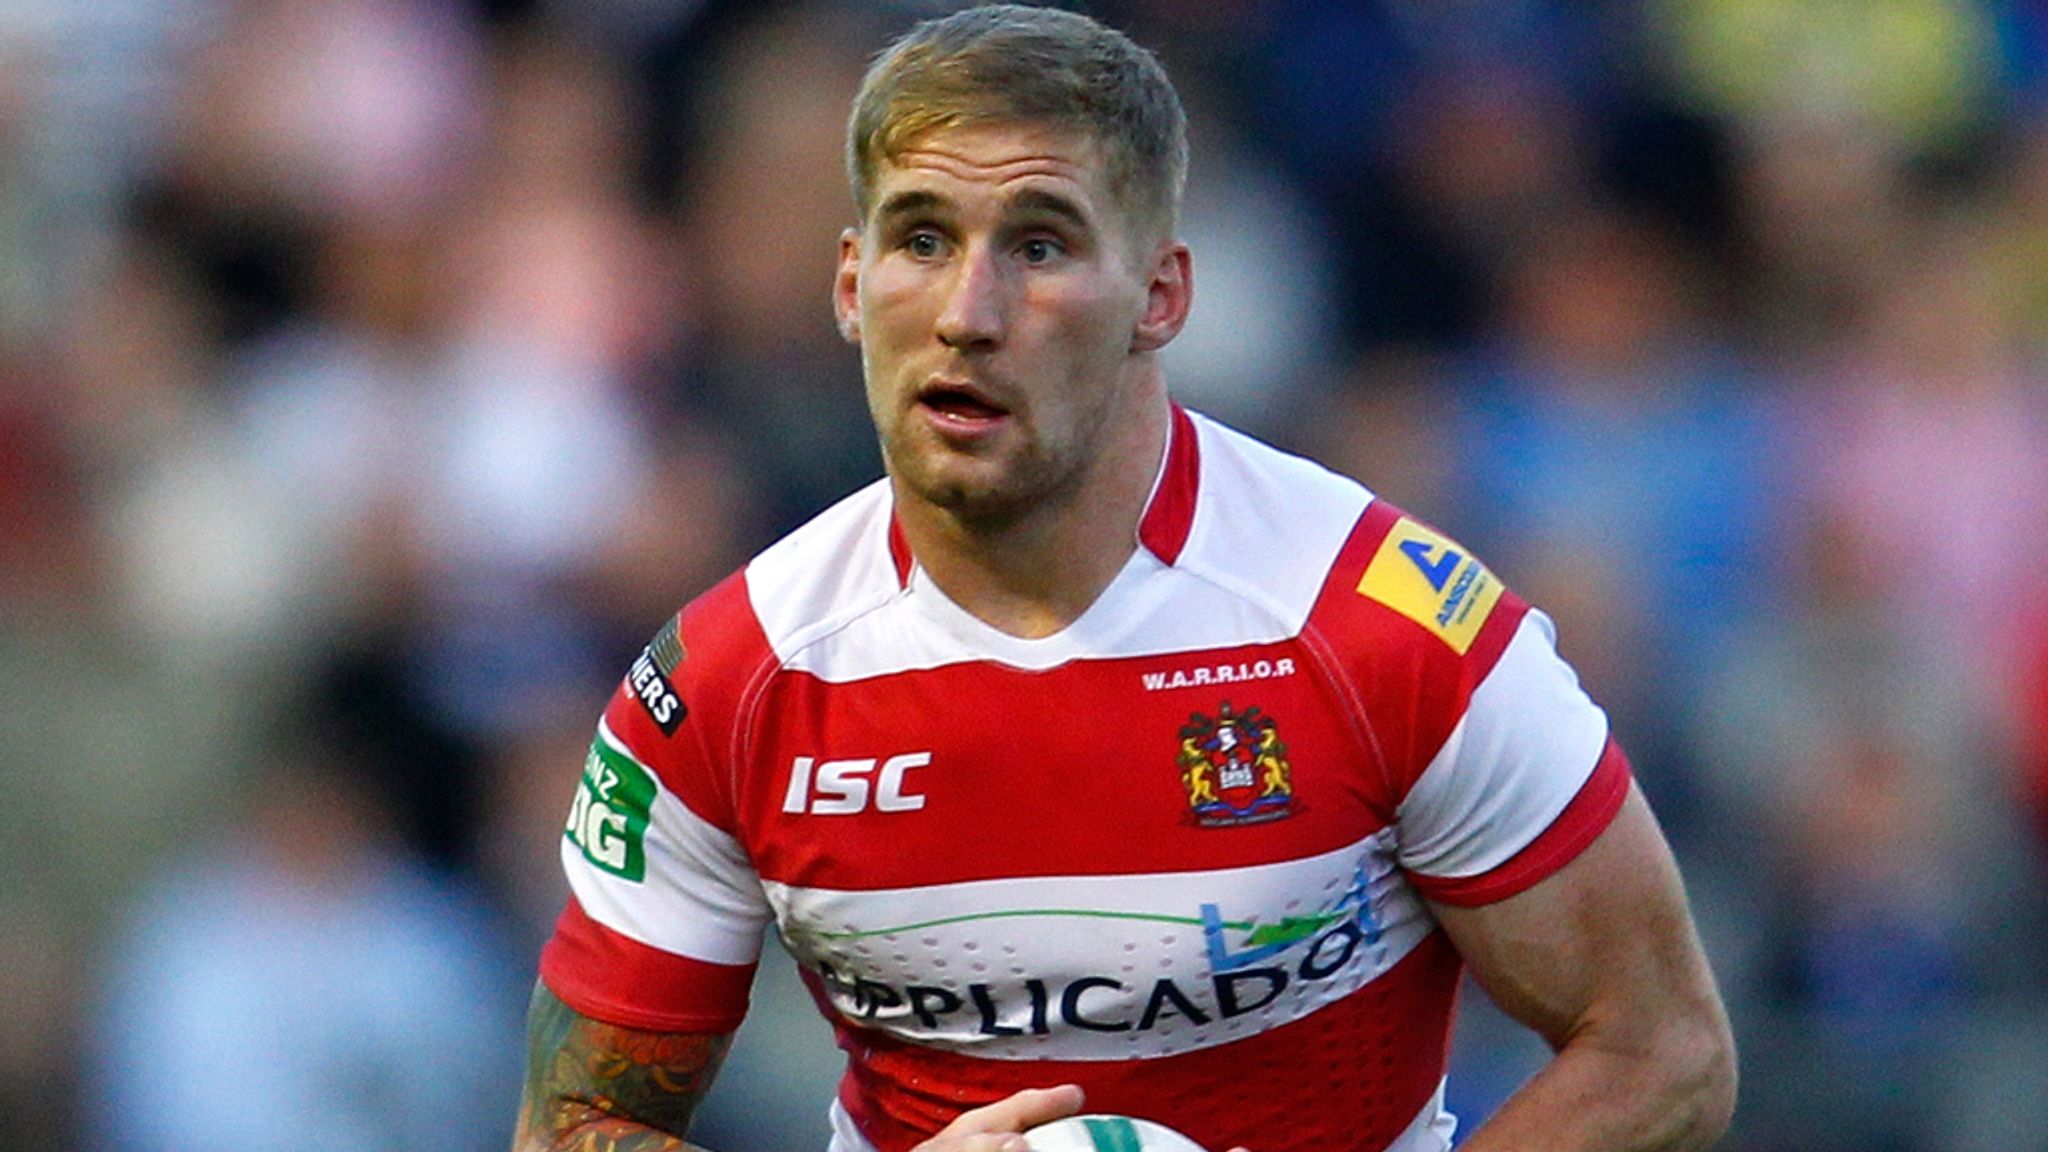 Challenge Cup Sam Tomkins focused only on Wigan Warriors ahead of Wembley final Rugby League News Sky Sports